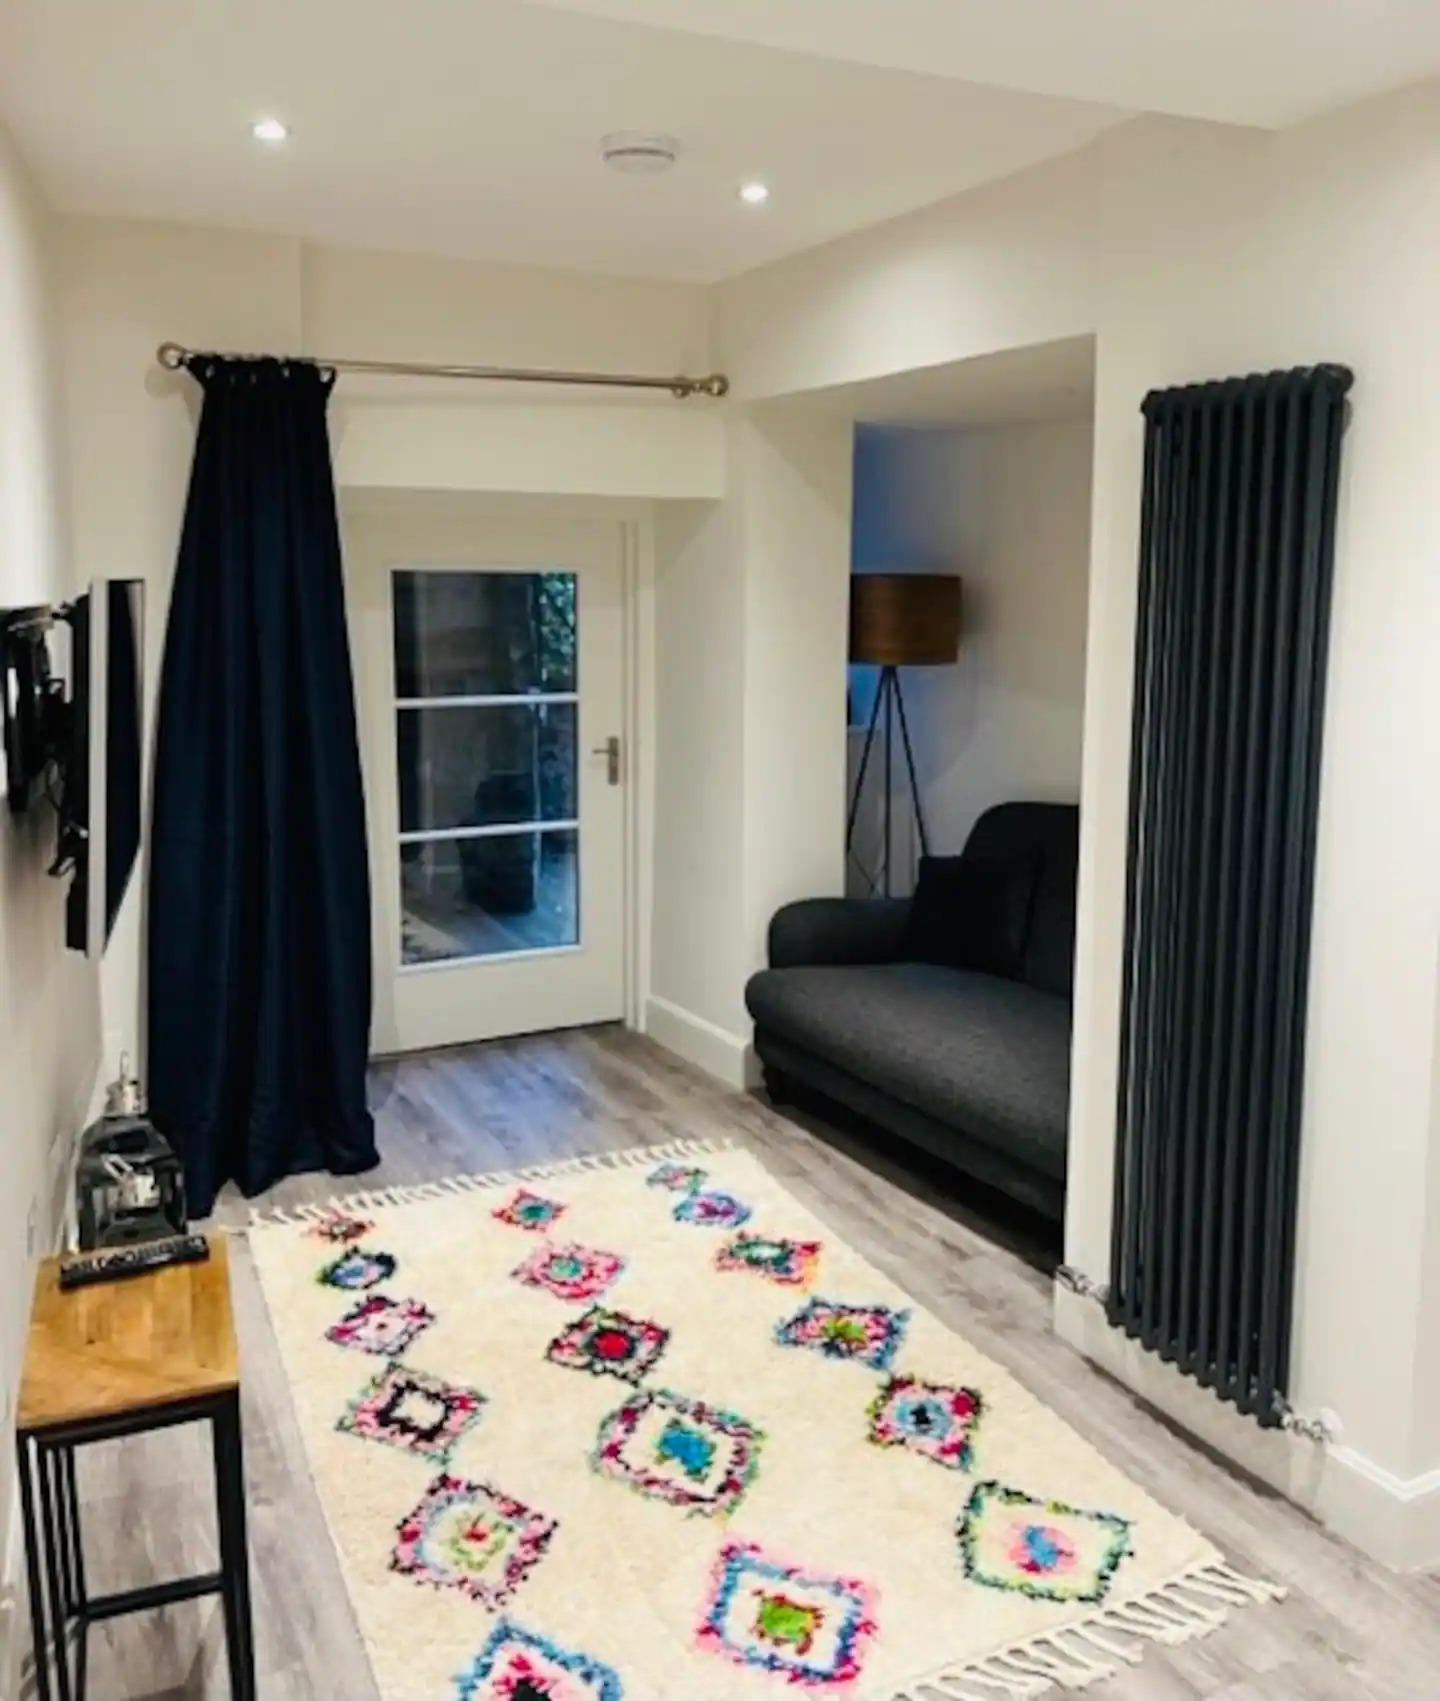 We have added a rug, curtain and tables since the professional photos were taken. The flat is now even more cosy and welcoming!